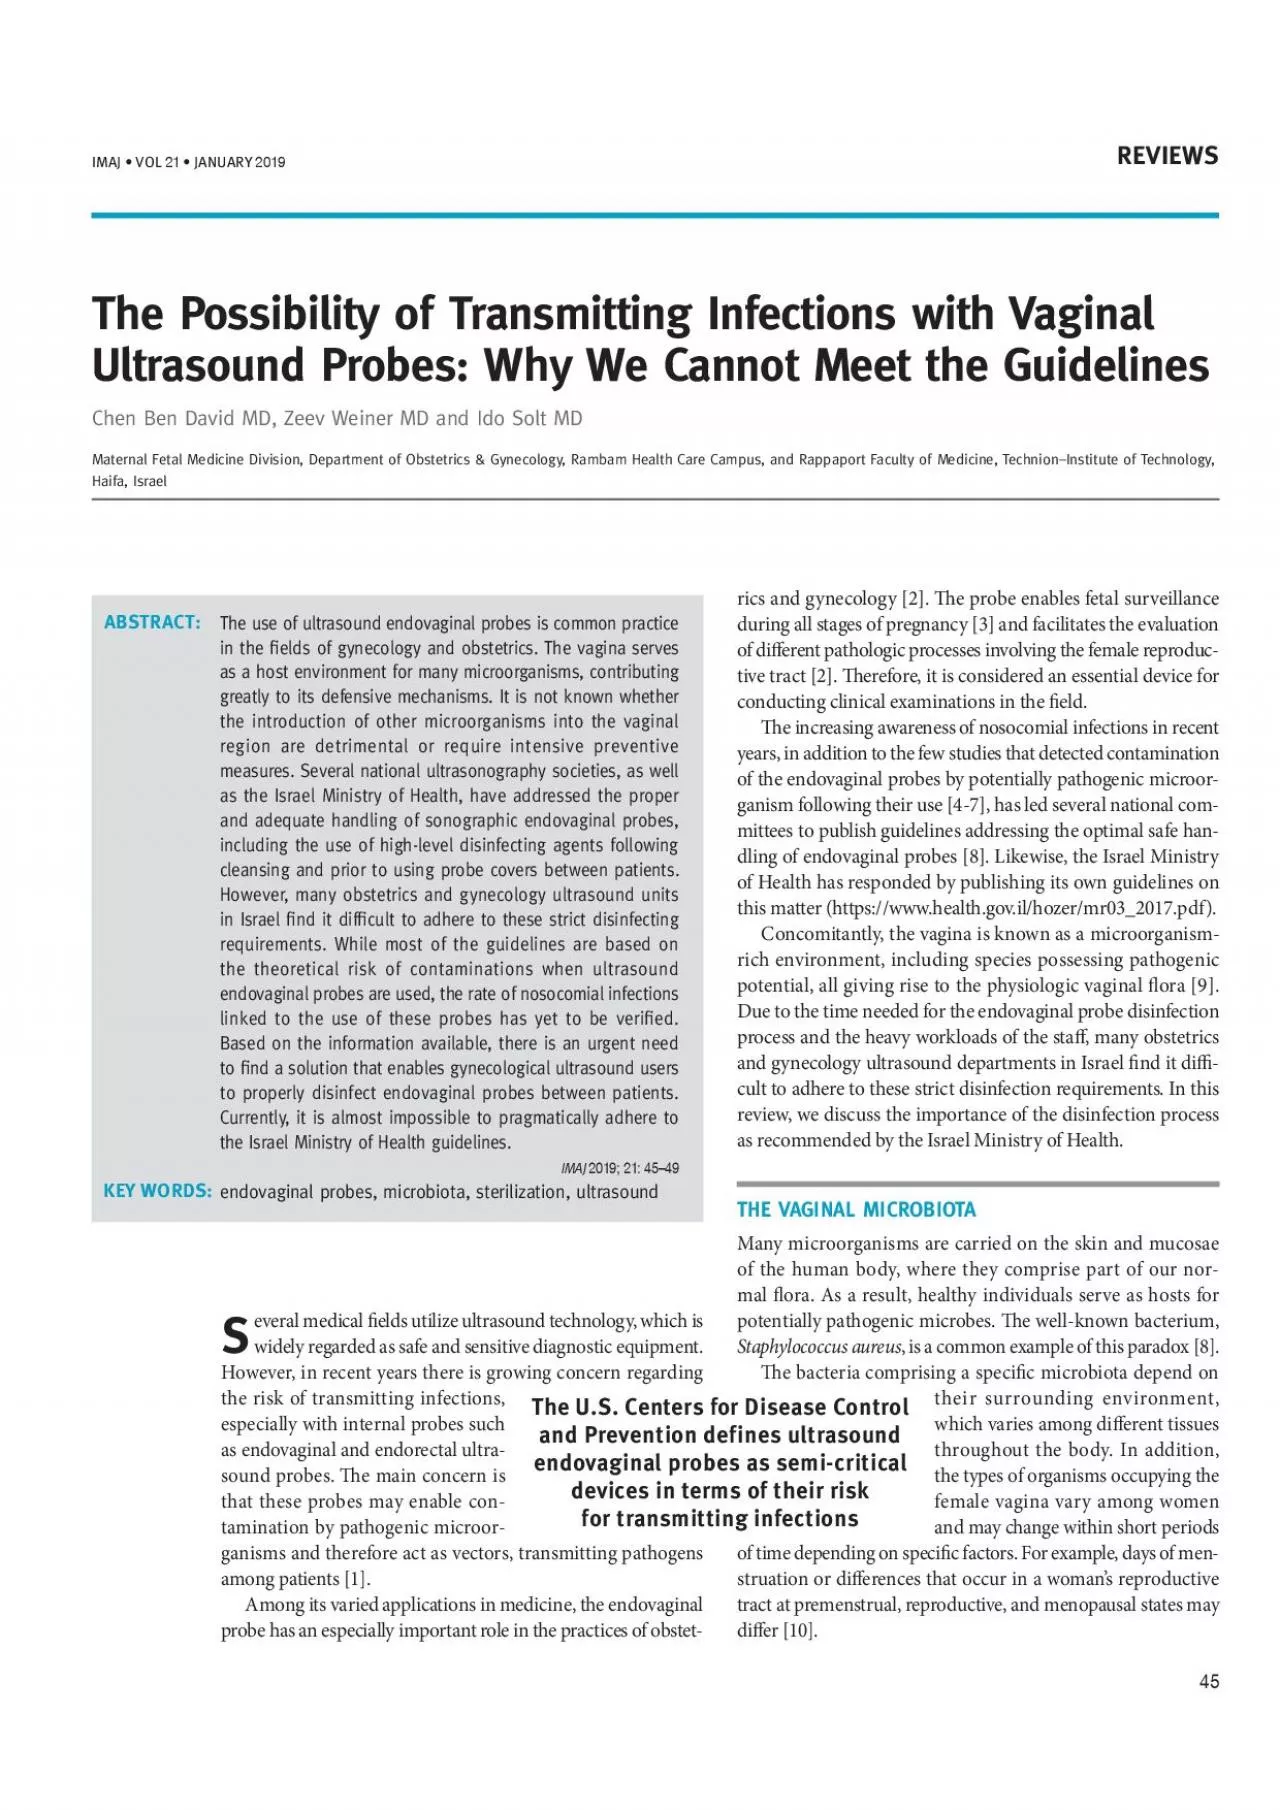 The use of ultrasound endovaginal probes is common practice in the el